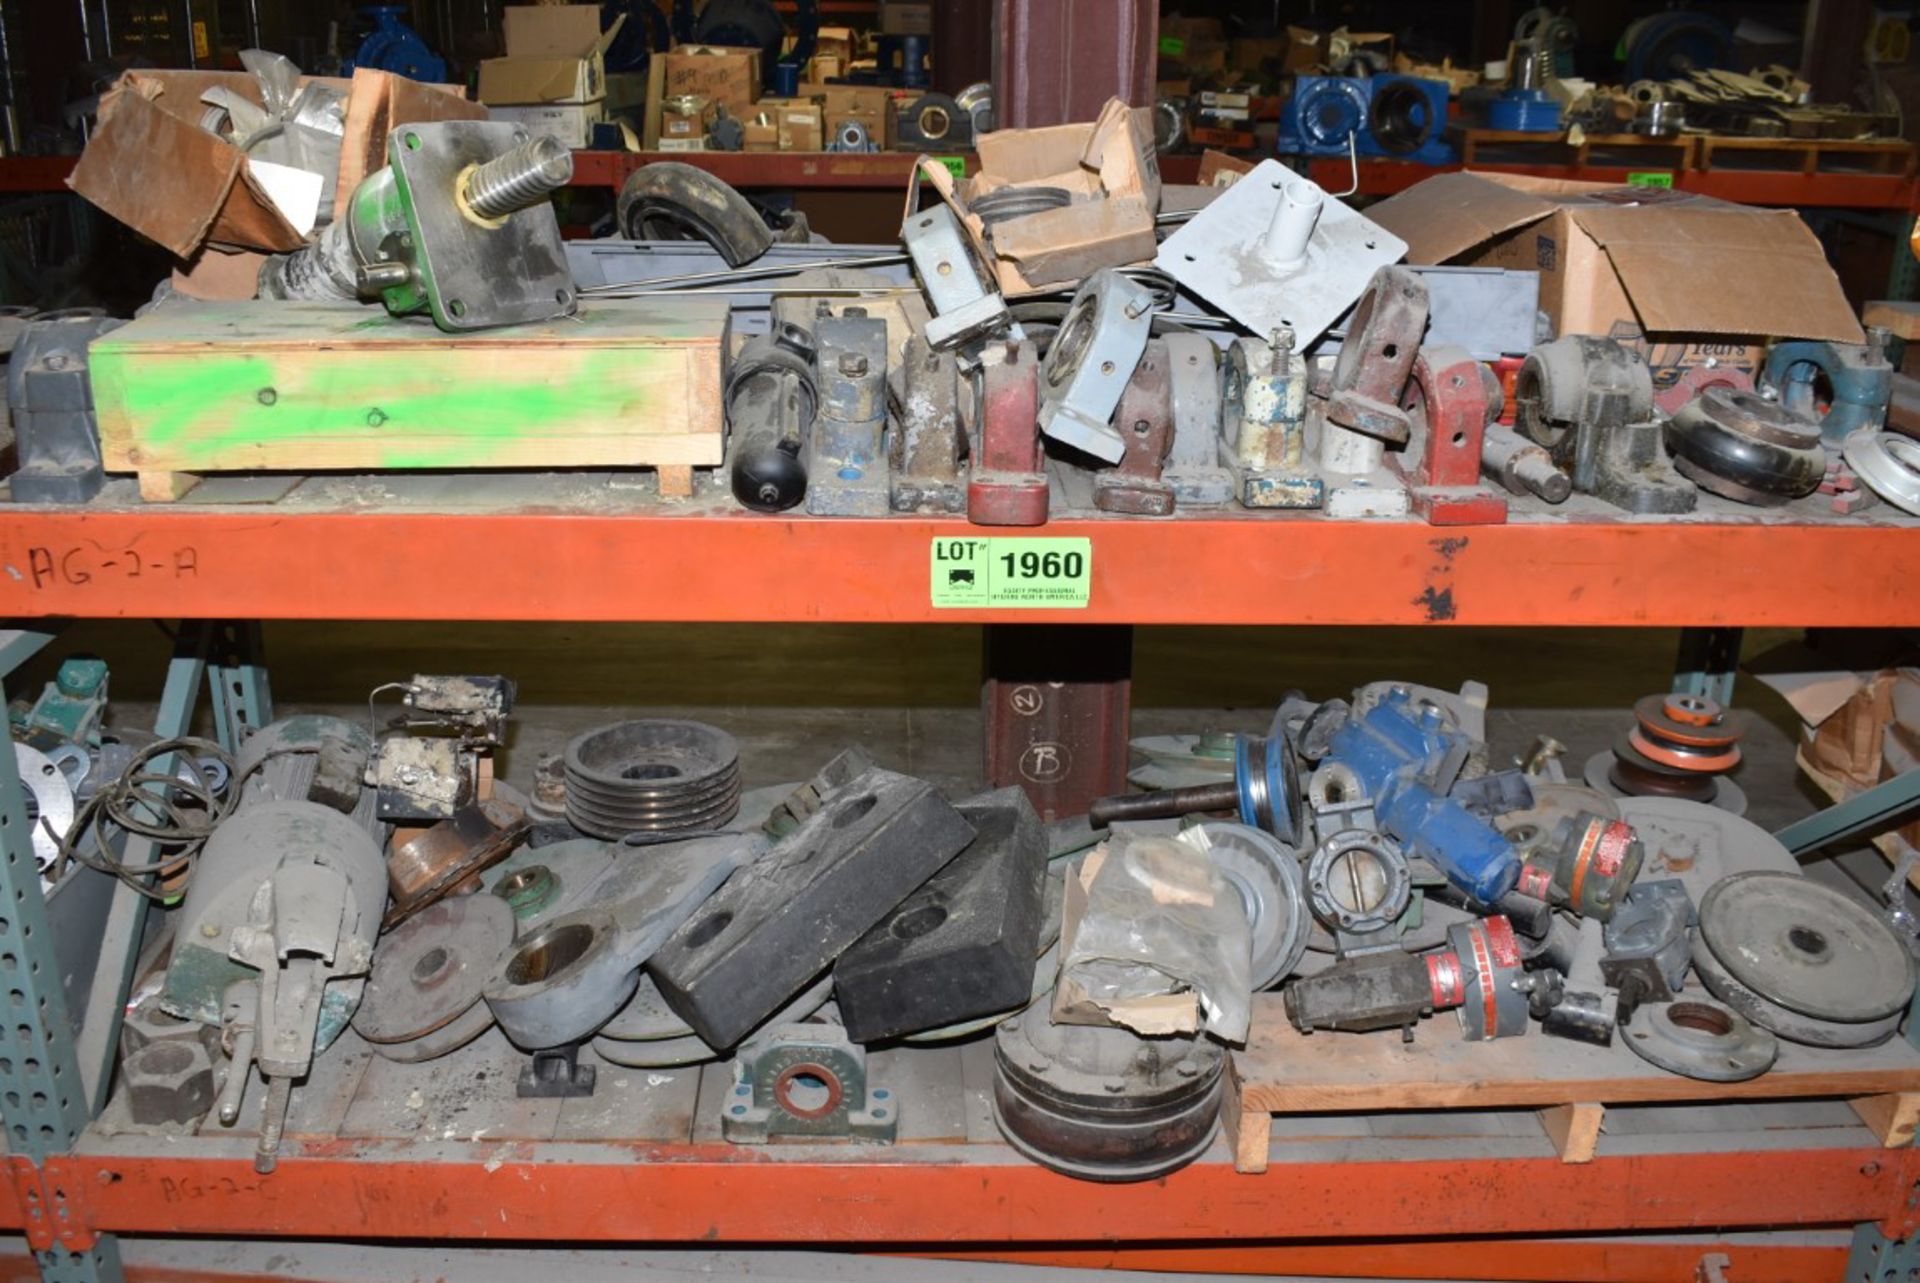 LOT/ CONTENTS OF BUNK - INCLUDING SPARE MOTOR, PILLOW BLOCKS, PULLEYS, ACTUATED VALVES, SPARE PARTS